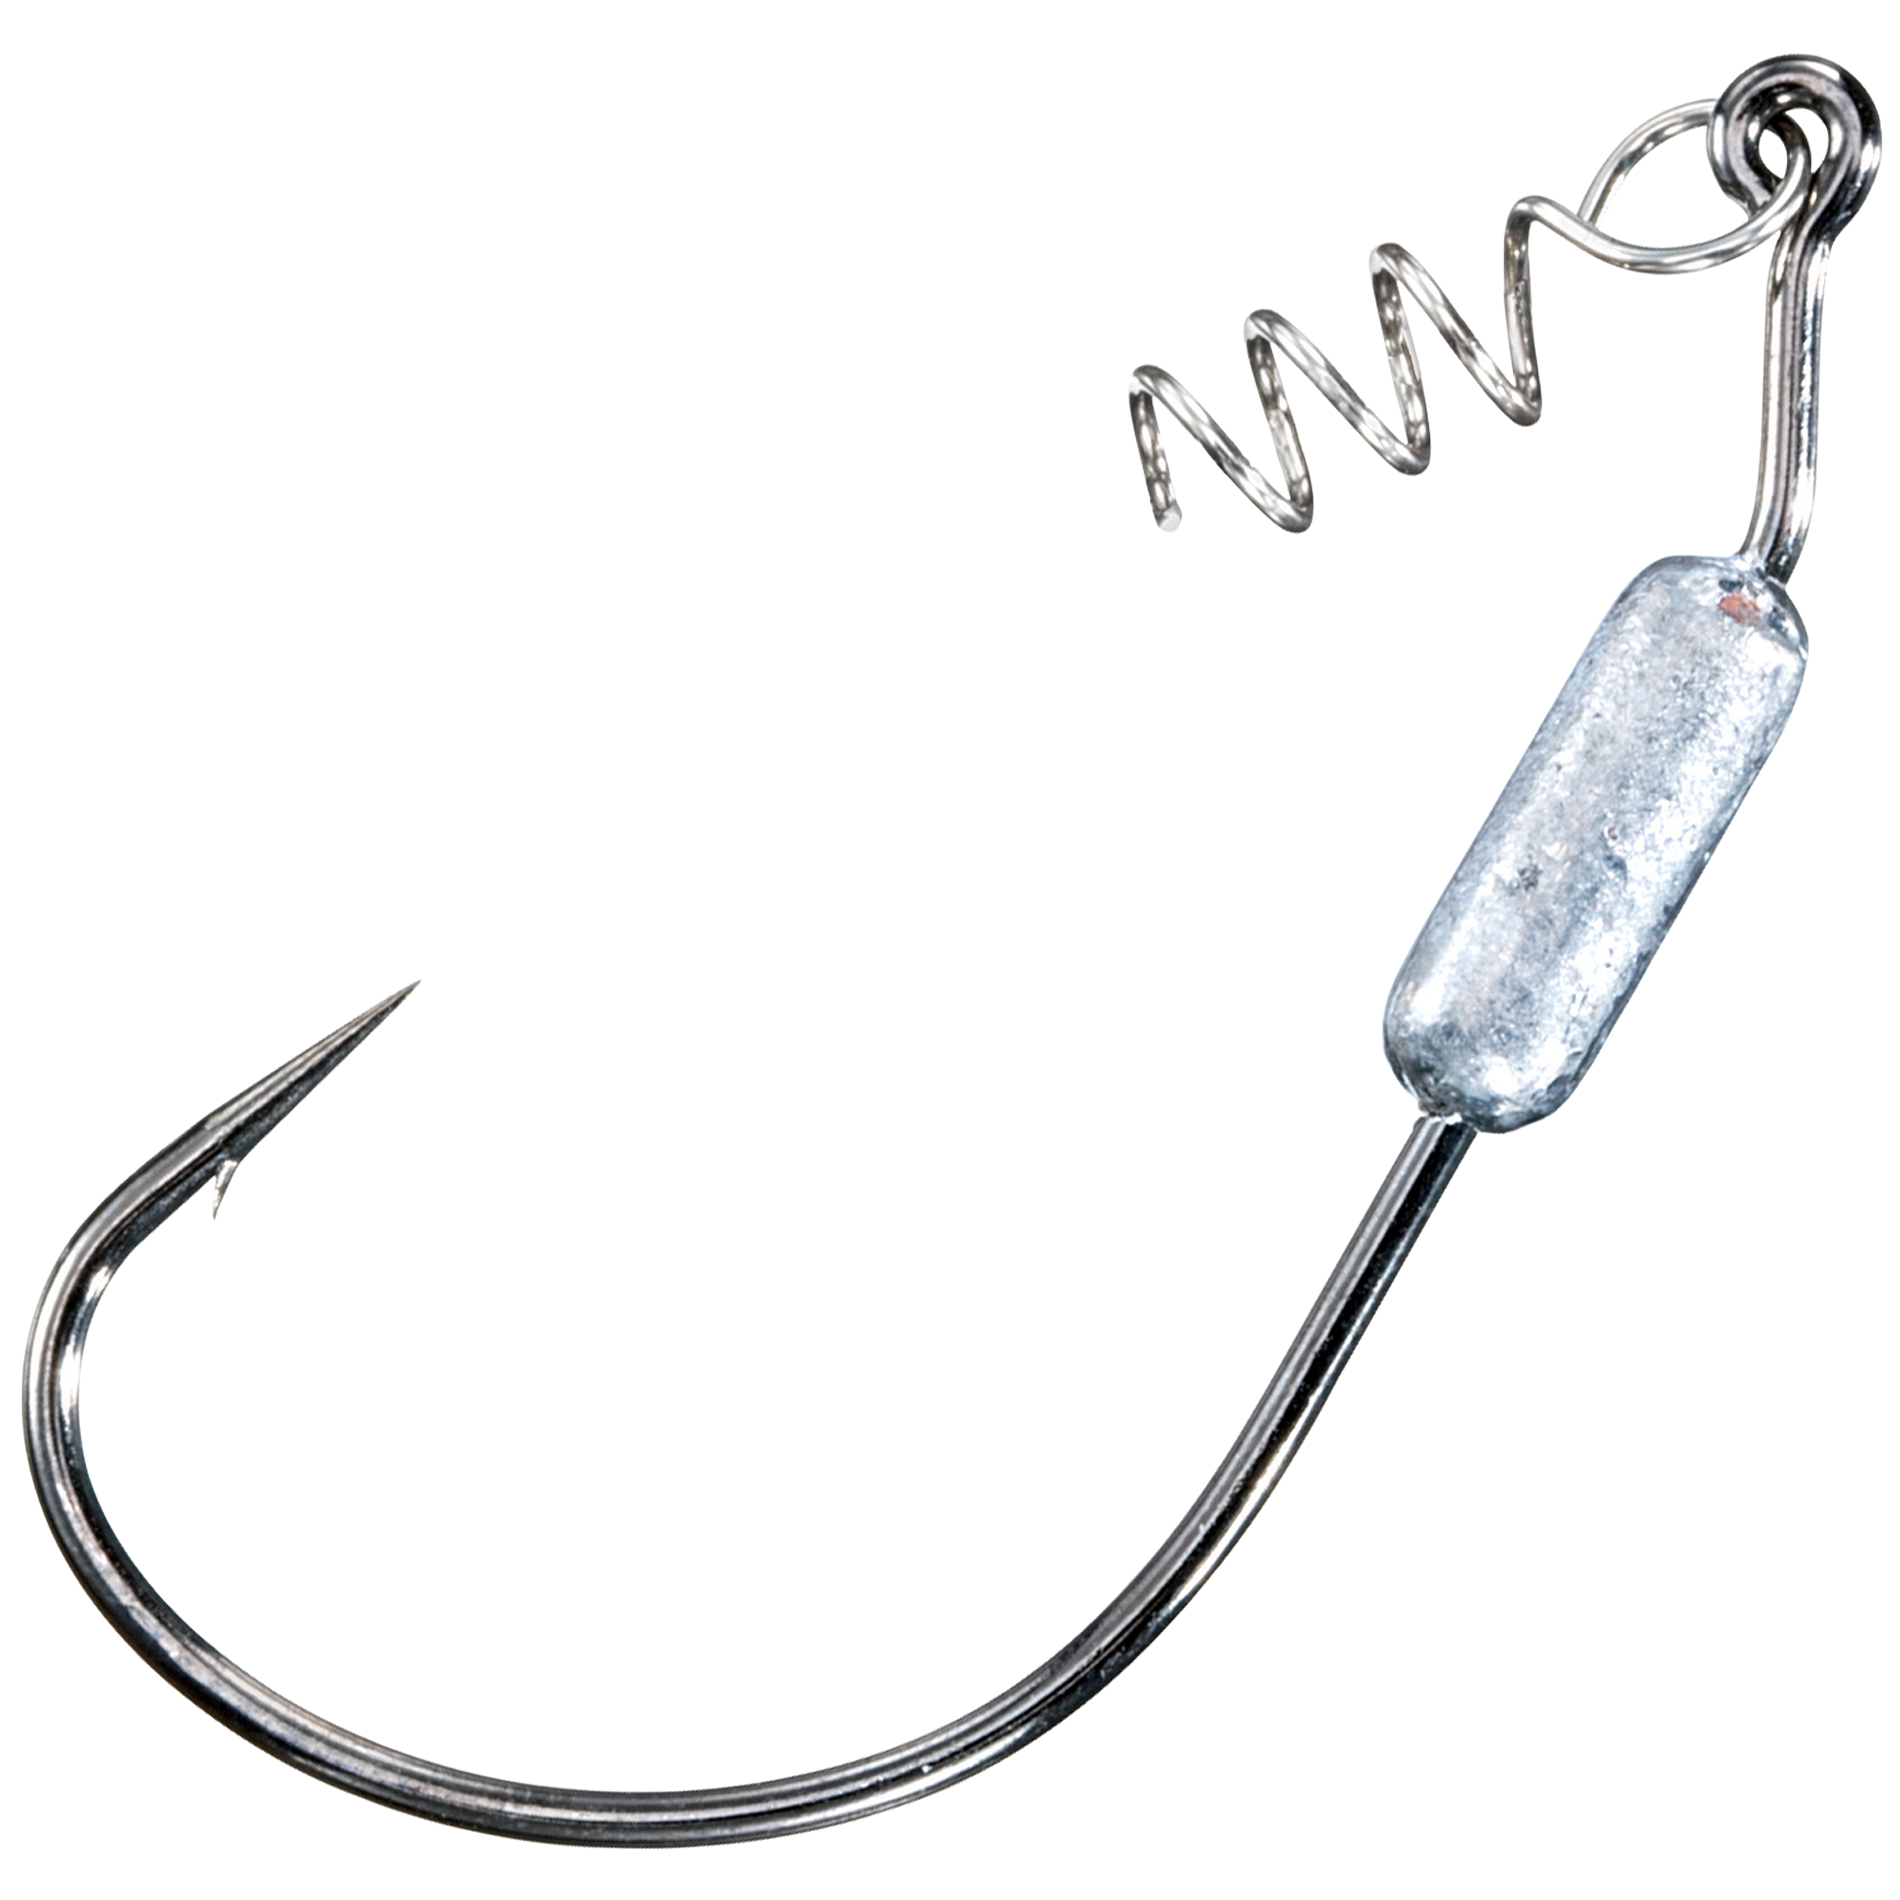 Mustad Power Lock Plus UltraPoint Weighted Hooks